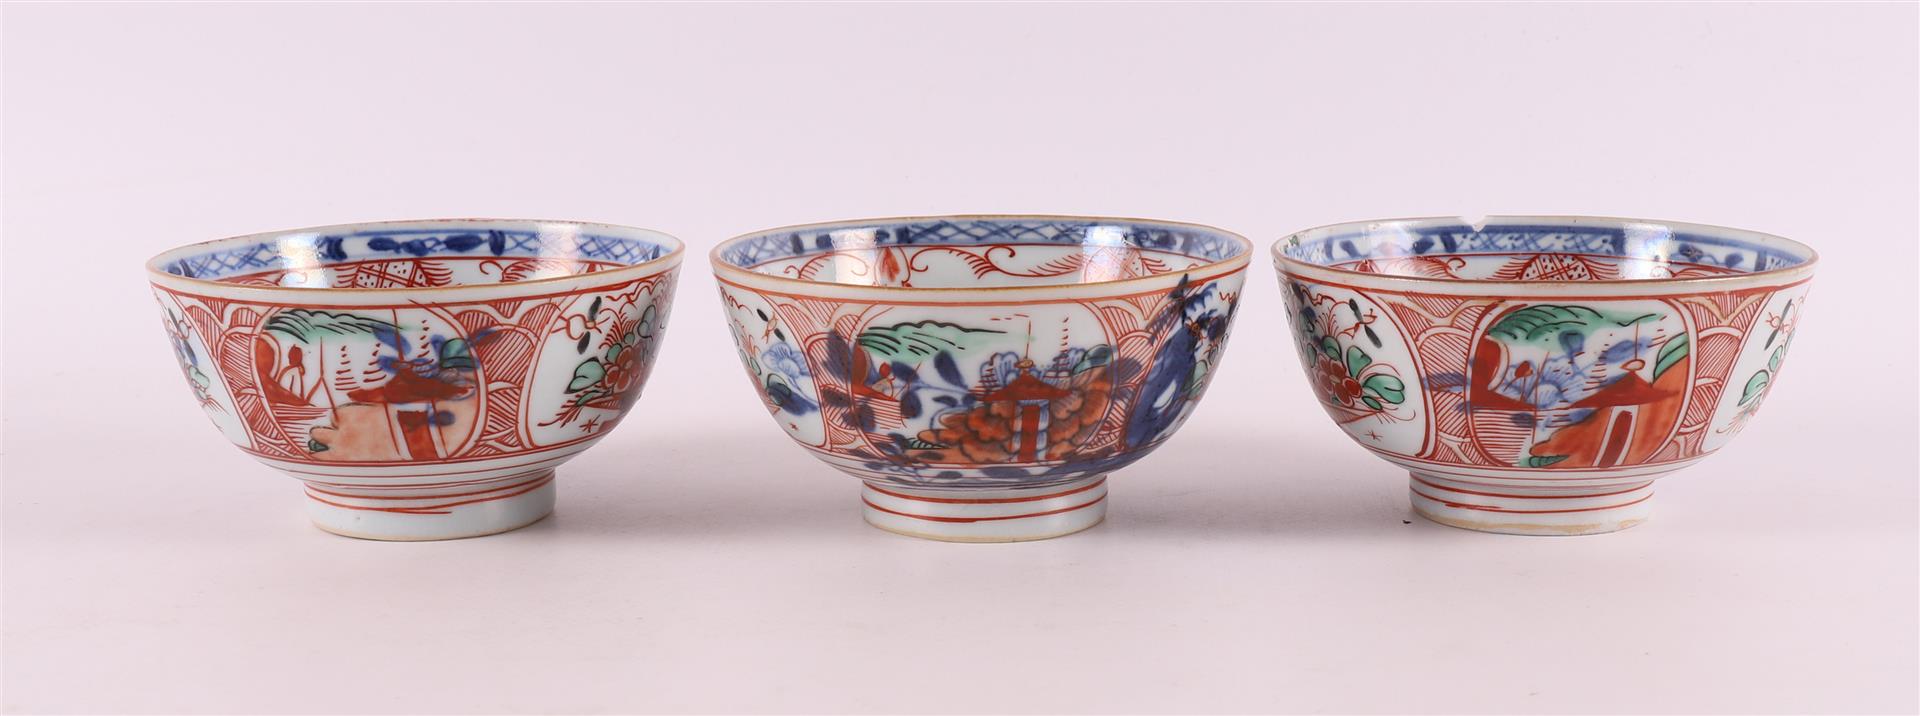 Five various porcelain Amsterdam variegated bowls, China, 18th century. - Image 12 of 17